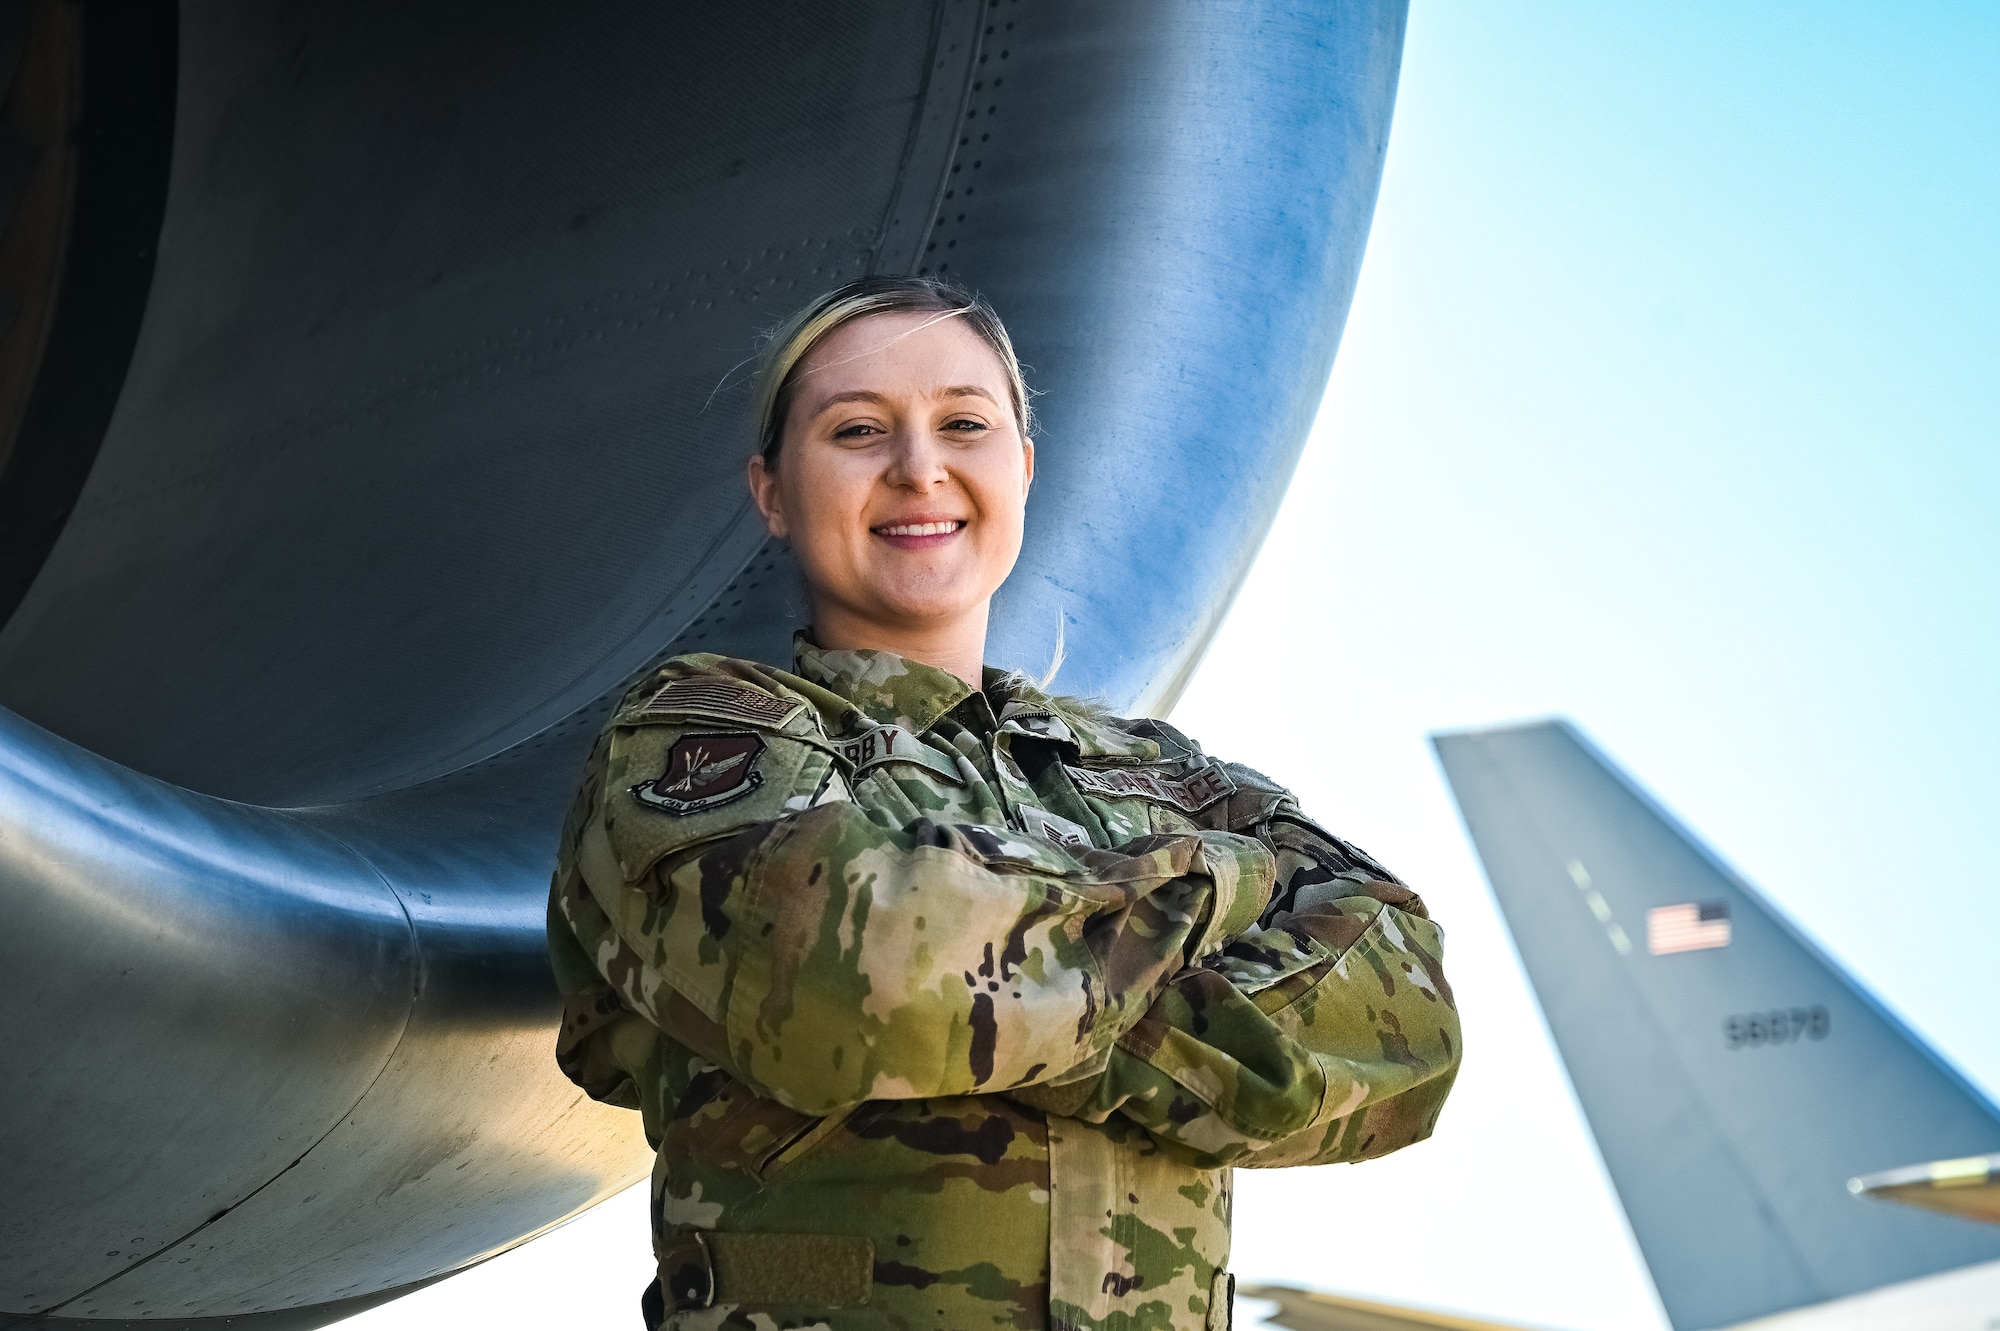 U.S. Air Force Tech. Sgt. Tiffany Irby, 305th Air Mobility Wing boom operator, poses for a flight line photo on 11 May, 2023 at Joint Base McGuire-Dix-Lakehurst, N.J. Irby is a part of the last crew to fly a local KC-10 Extender sortie from the 305th AMW. The 305th AMW extends America's global reach by generating, mobilizing and deploying KC-10 Extenders and C-17 Globemaster III’s to conduct strategic airlift and air refueling missions worldwide. In November 2021, the Wing began transitioning to the new KC-46A Pegasus air refueling aircraft.